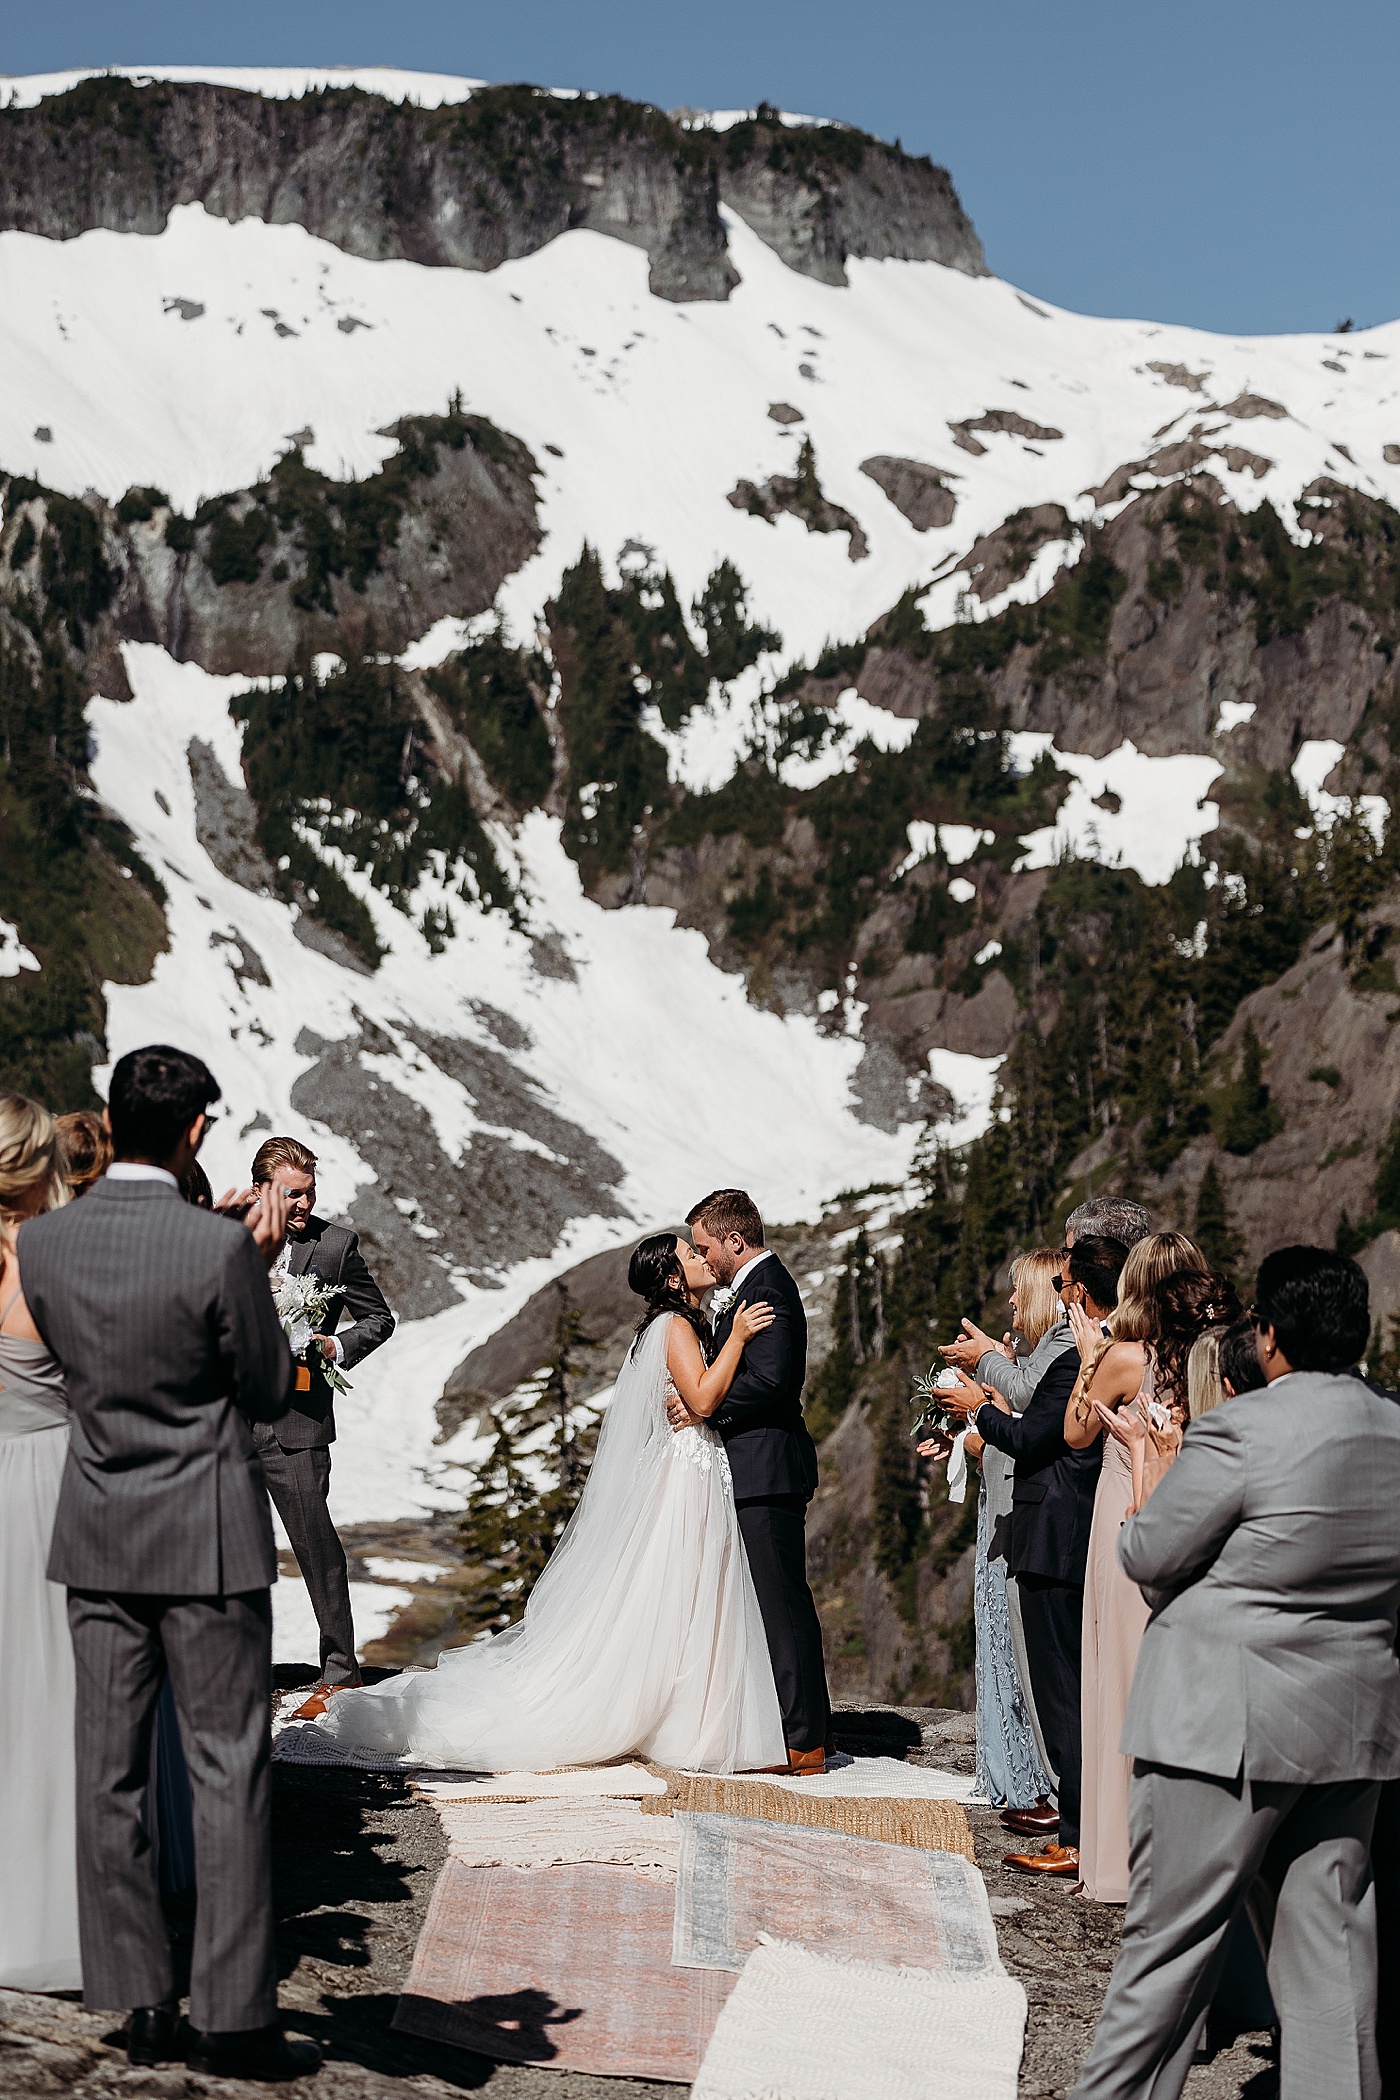 Bride and groom first kiss during intimate elopement ceremony | Megan Montalvo Photography